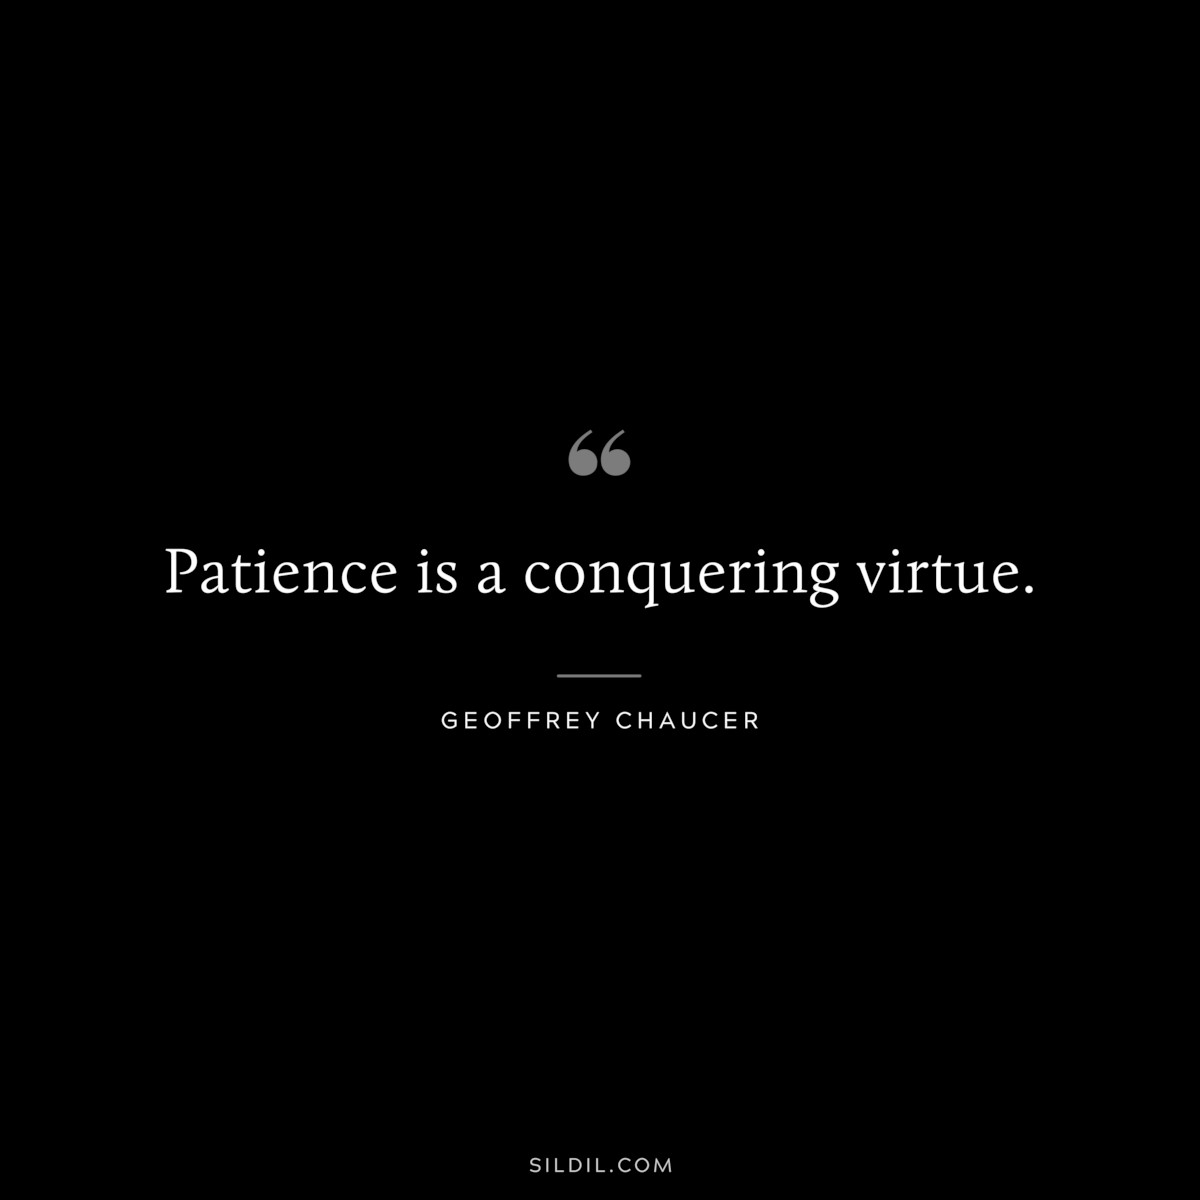 Patience is a conquering virtue. ― Geoffrey Chaucer